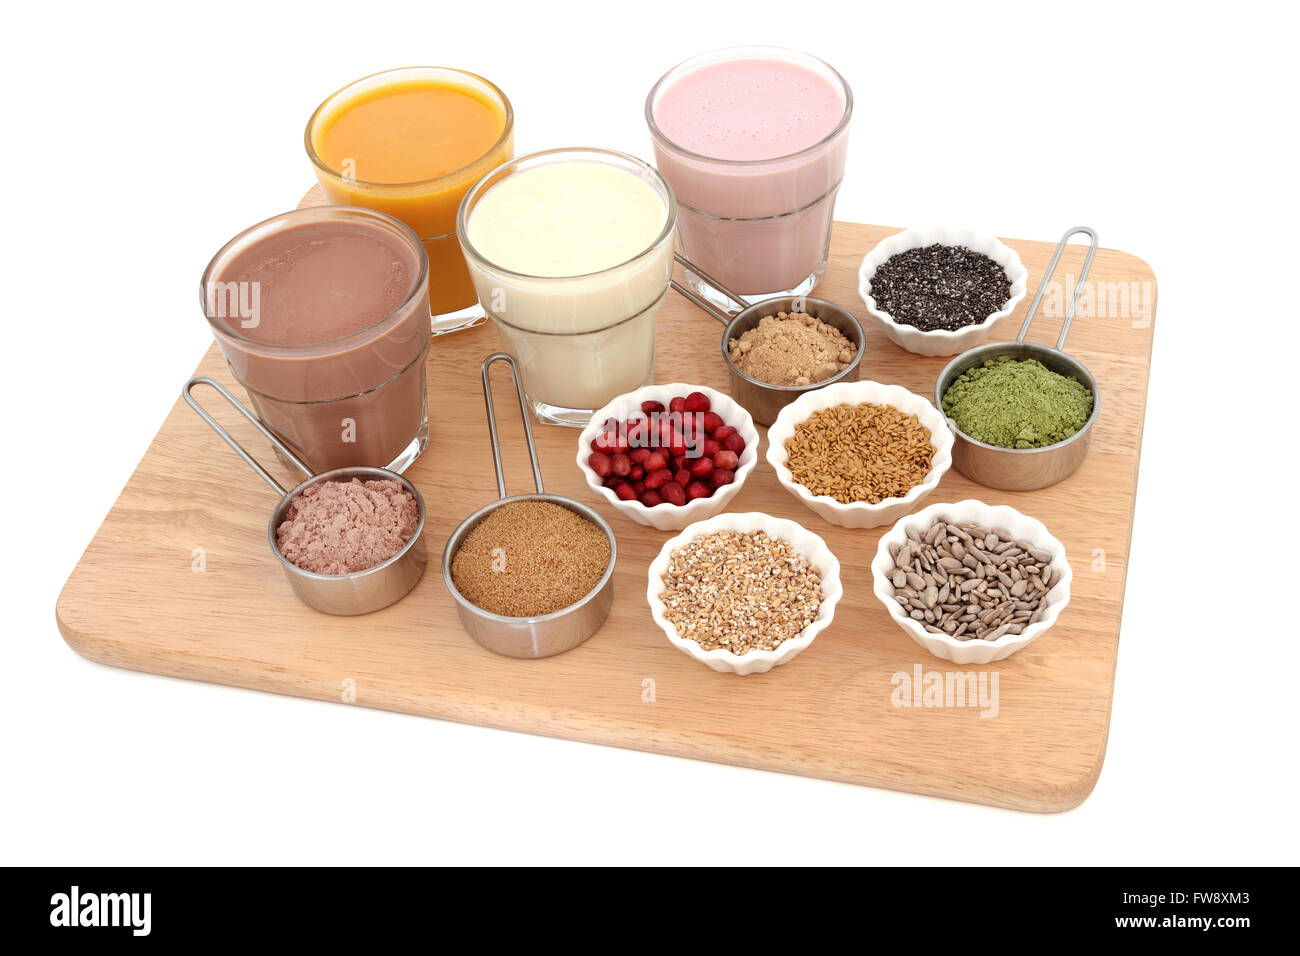 Body building health food with protein and fruit juice shakes, chocolate whey, wheat grass, pomegranate and maca powder. Stock Photo